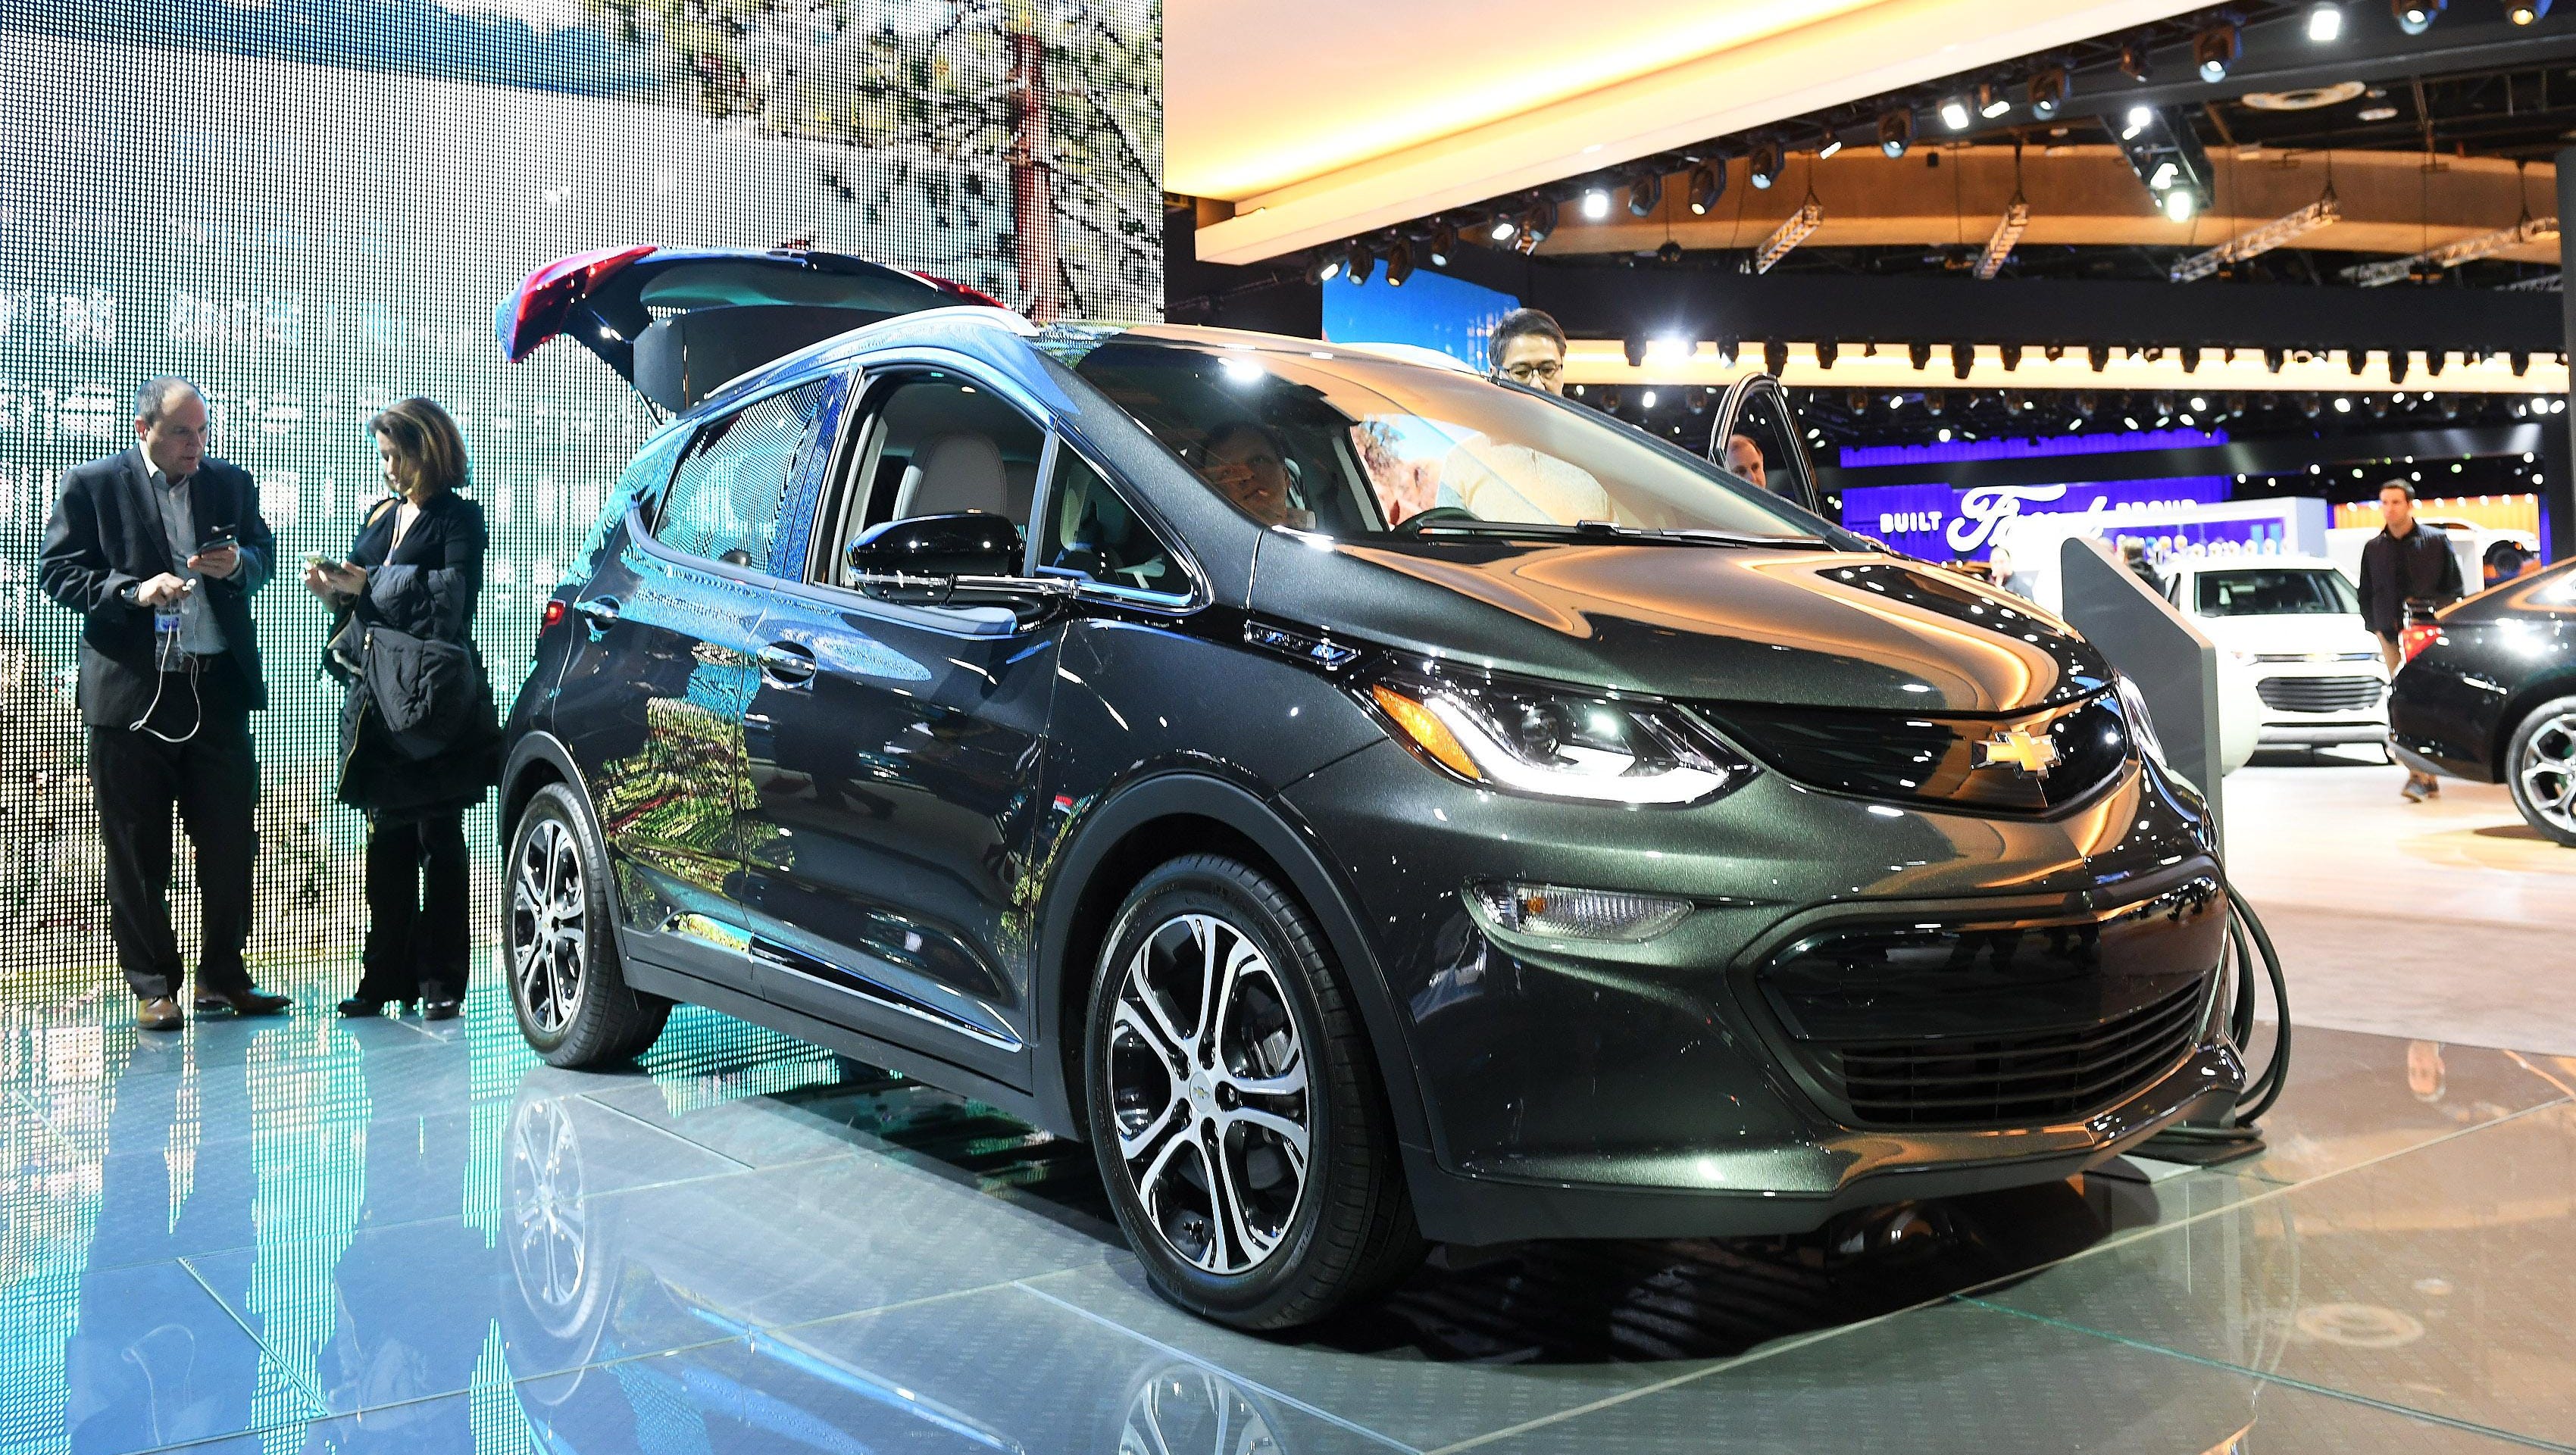 The 2019 Chevrolet Bolt EV at the North American International Auto Show at Cobo Center in Detroit on Jan. 17, 2019.